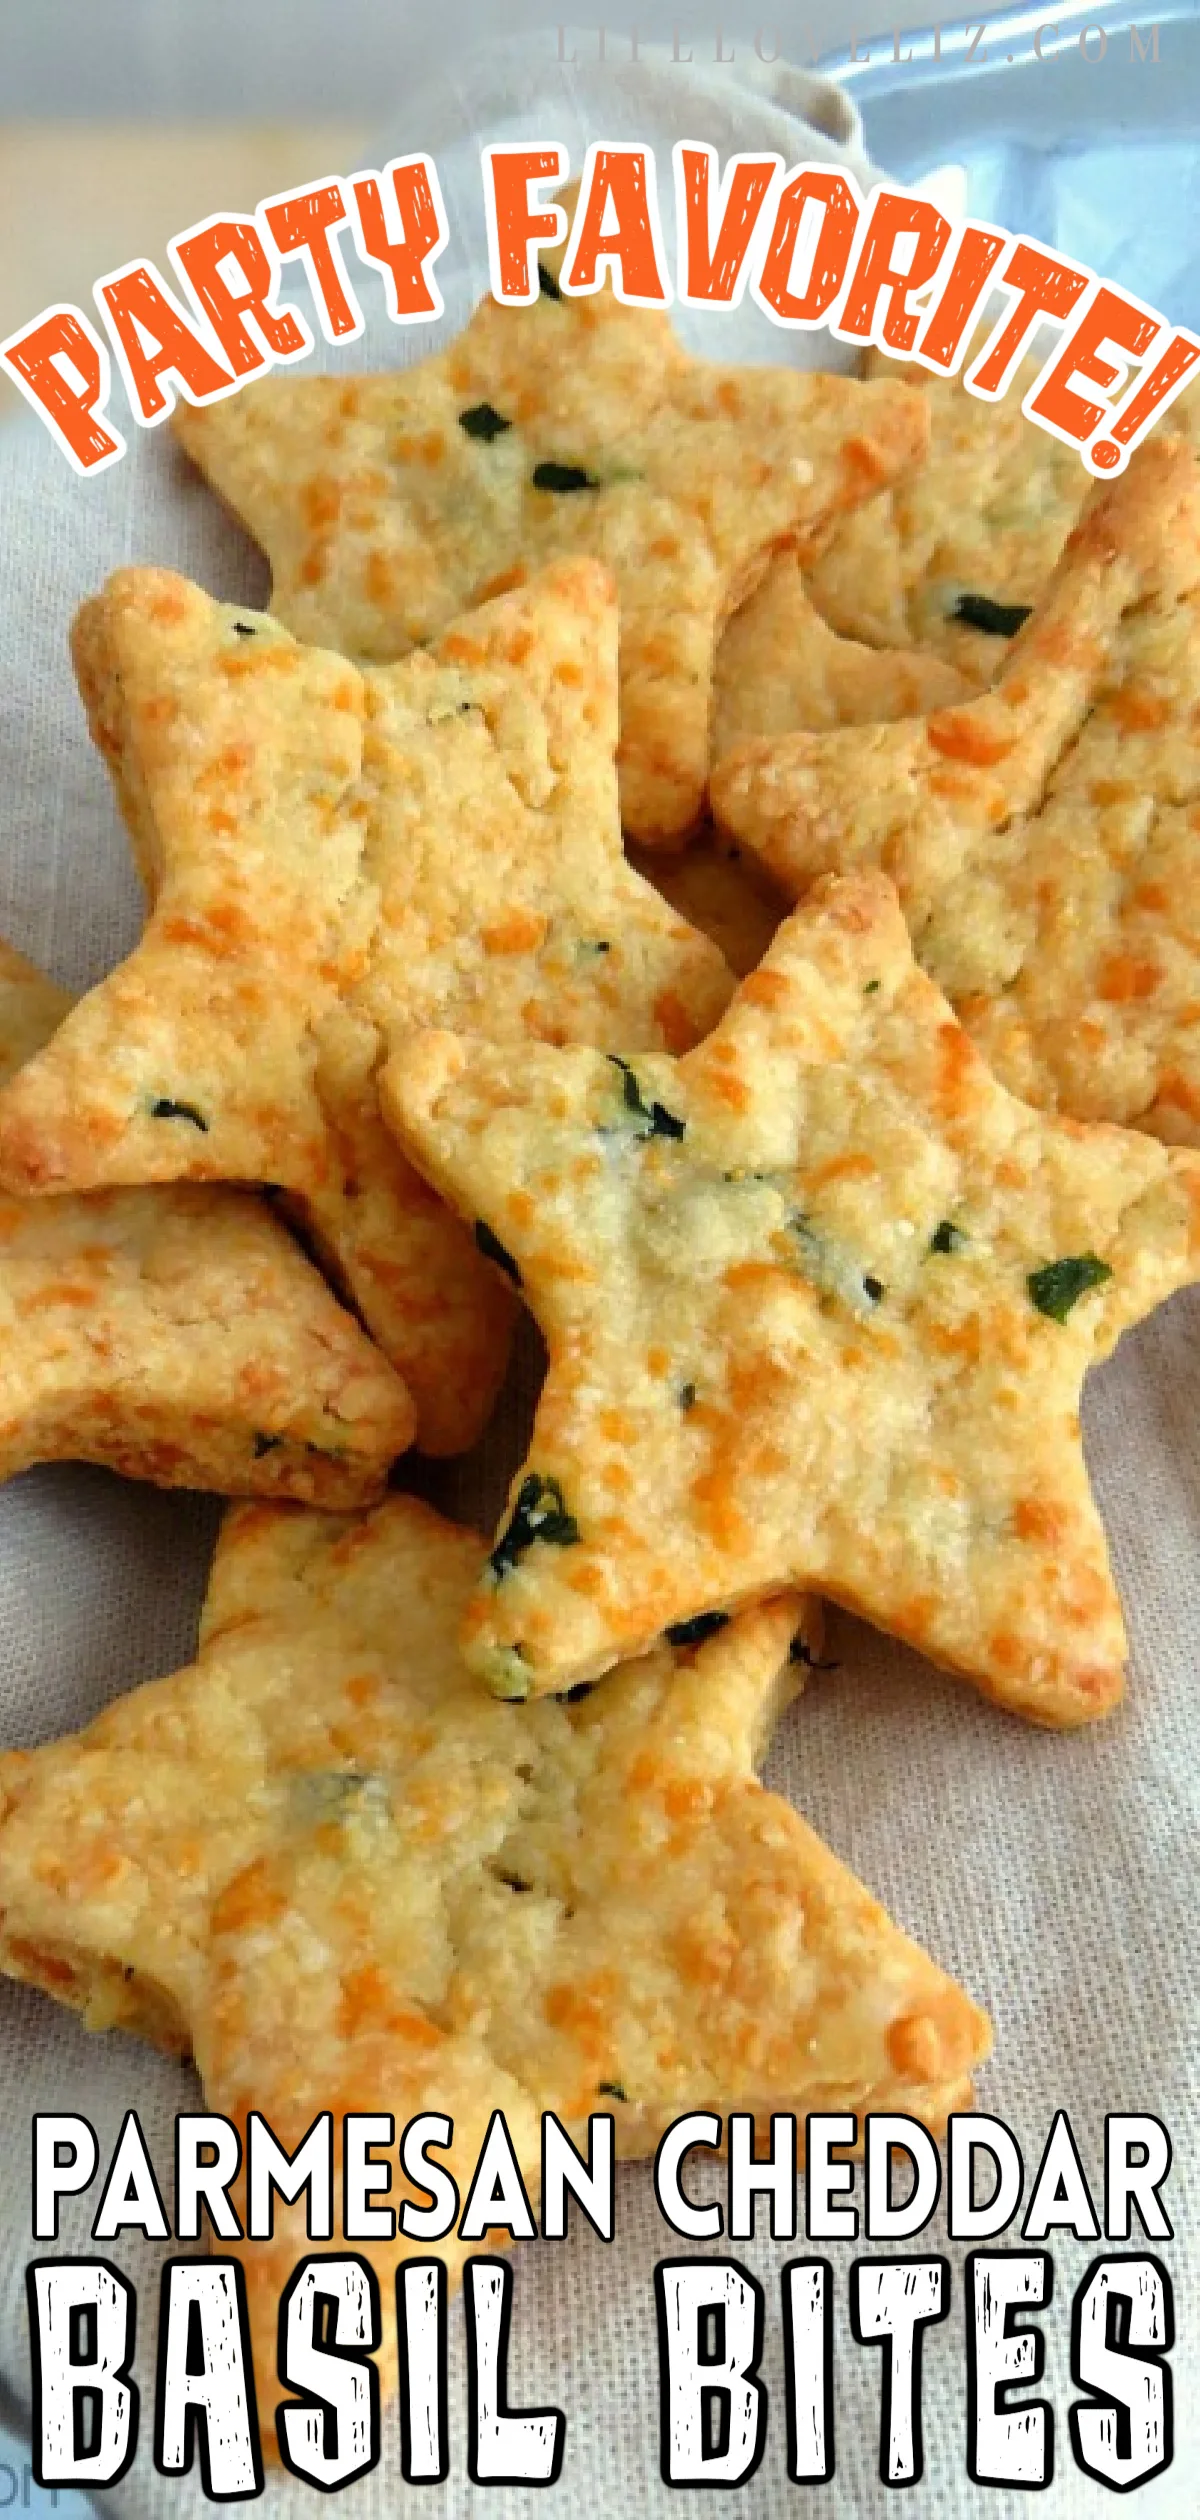 Parmesan Cheddar Basil Bites are a delicious appetizer perfect for any event or party! They are crisp outside but soft and tender inside.